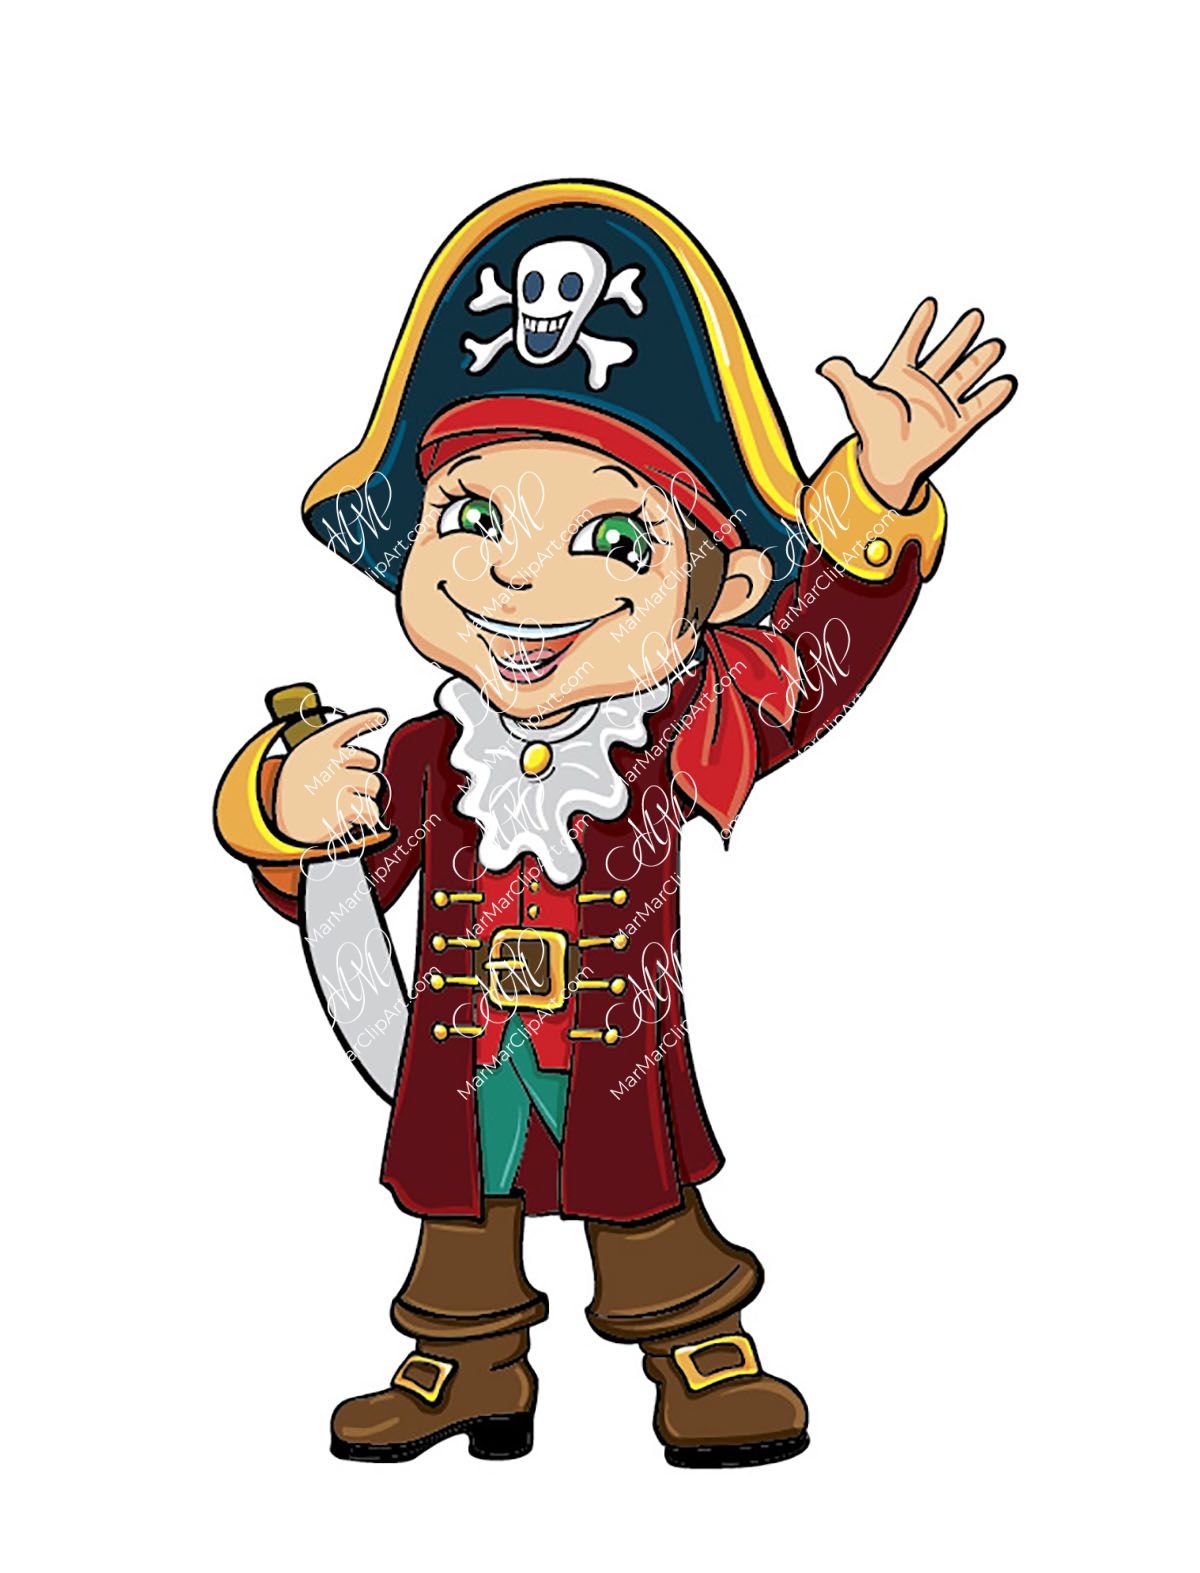 Pirate. Vector drawing. EPS file format (Illustrator10). Instant download.